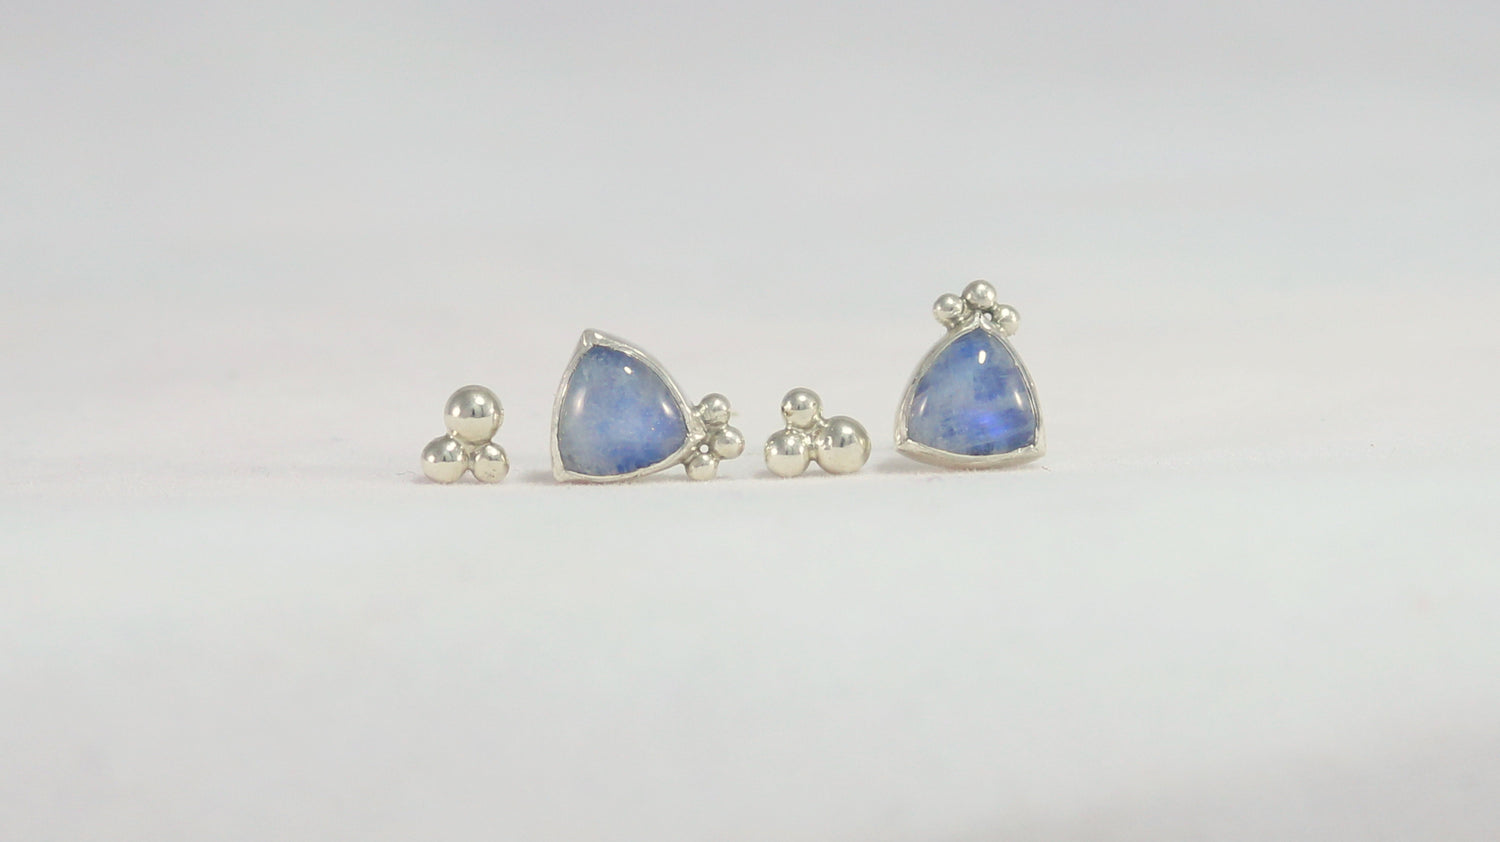 2 pairs of stud earrings. One pair is 3 silver bubbles decreasing in size shaped like a pyramid. The other pair is trillion rainbow moonstones with three bubbles on one of the points.